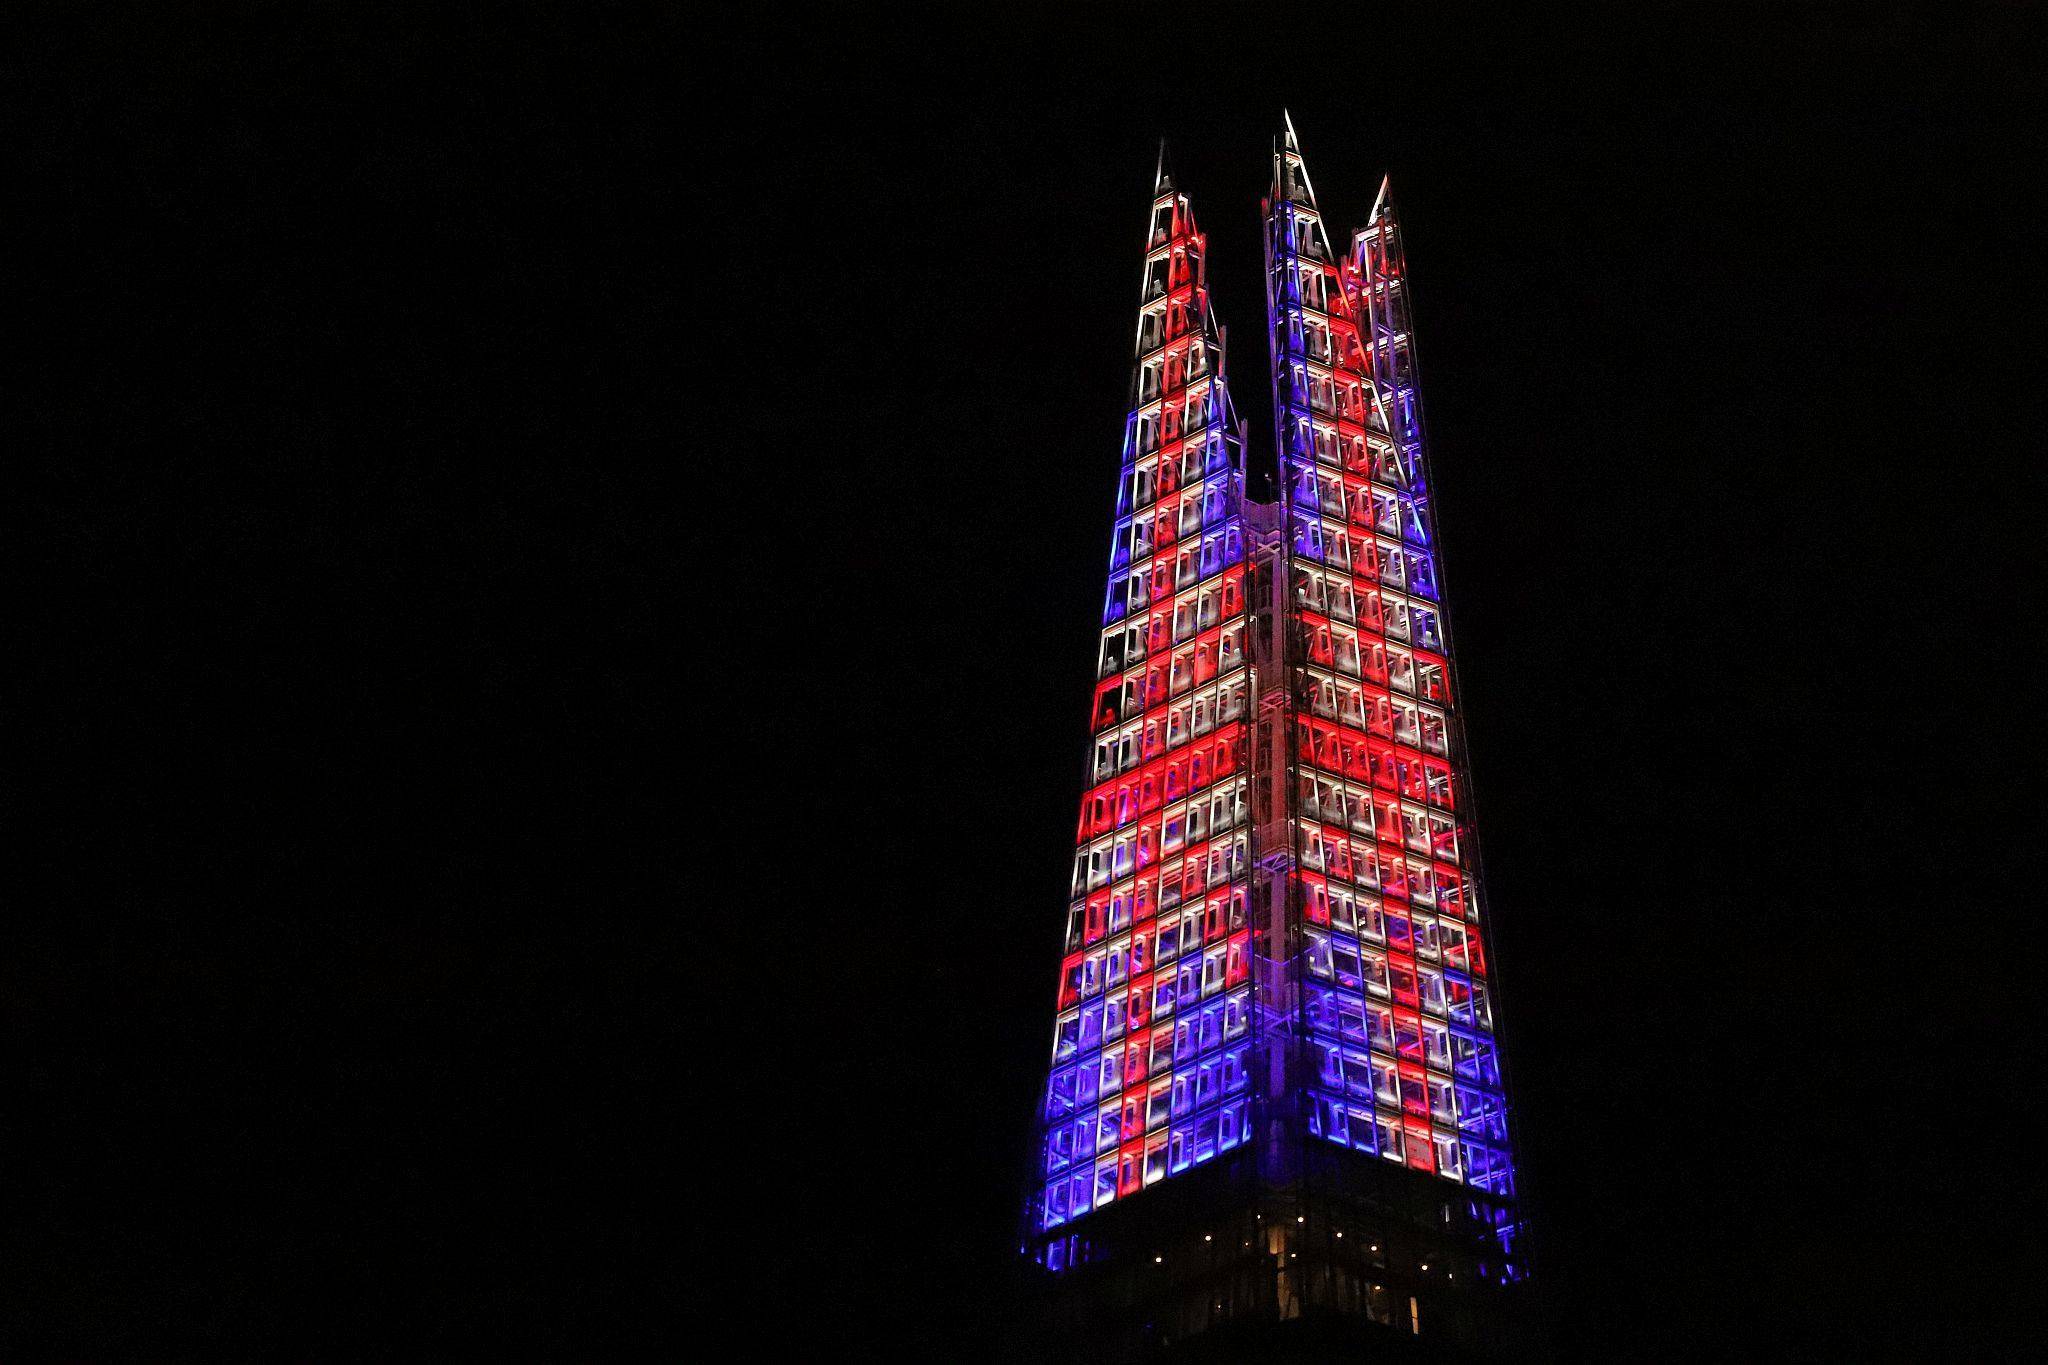 The Shard lit red, white and blue to mark the Coronation of King Charles III and Queen Camilla. Photo taken 07-May-2023. London.